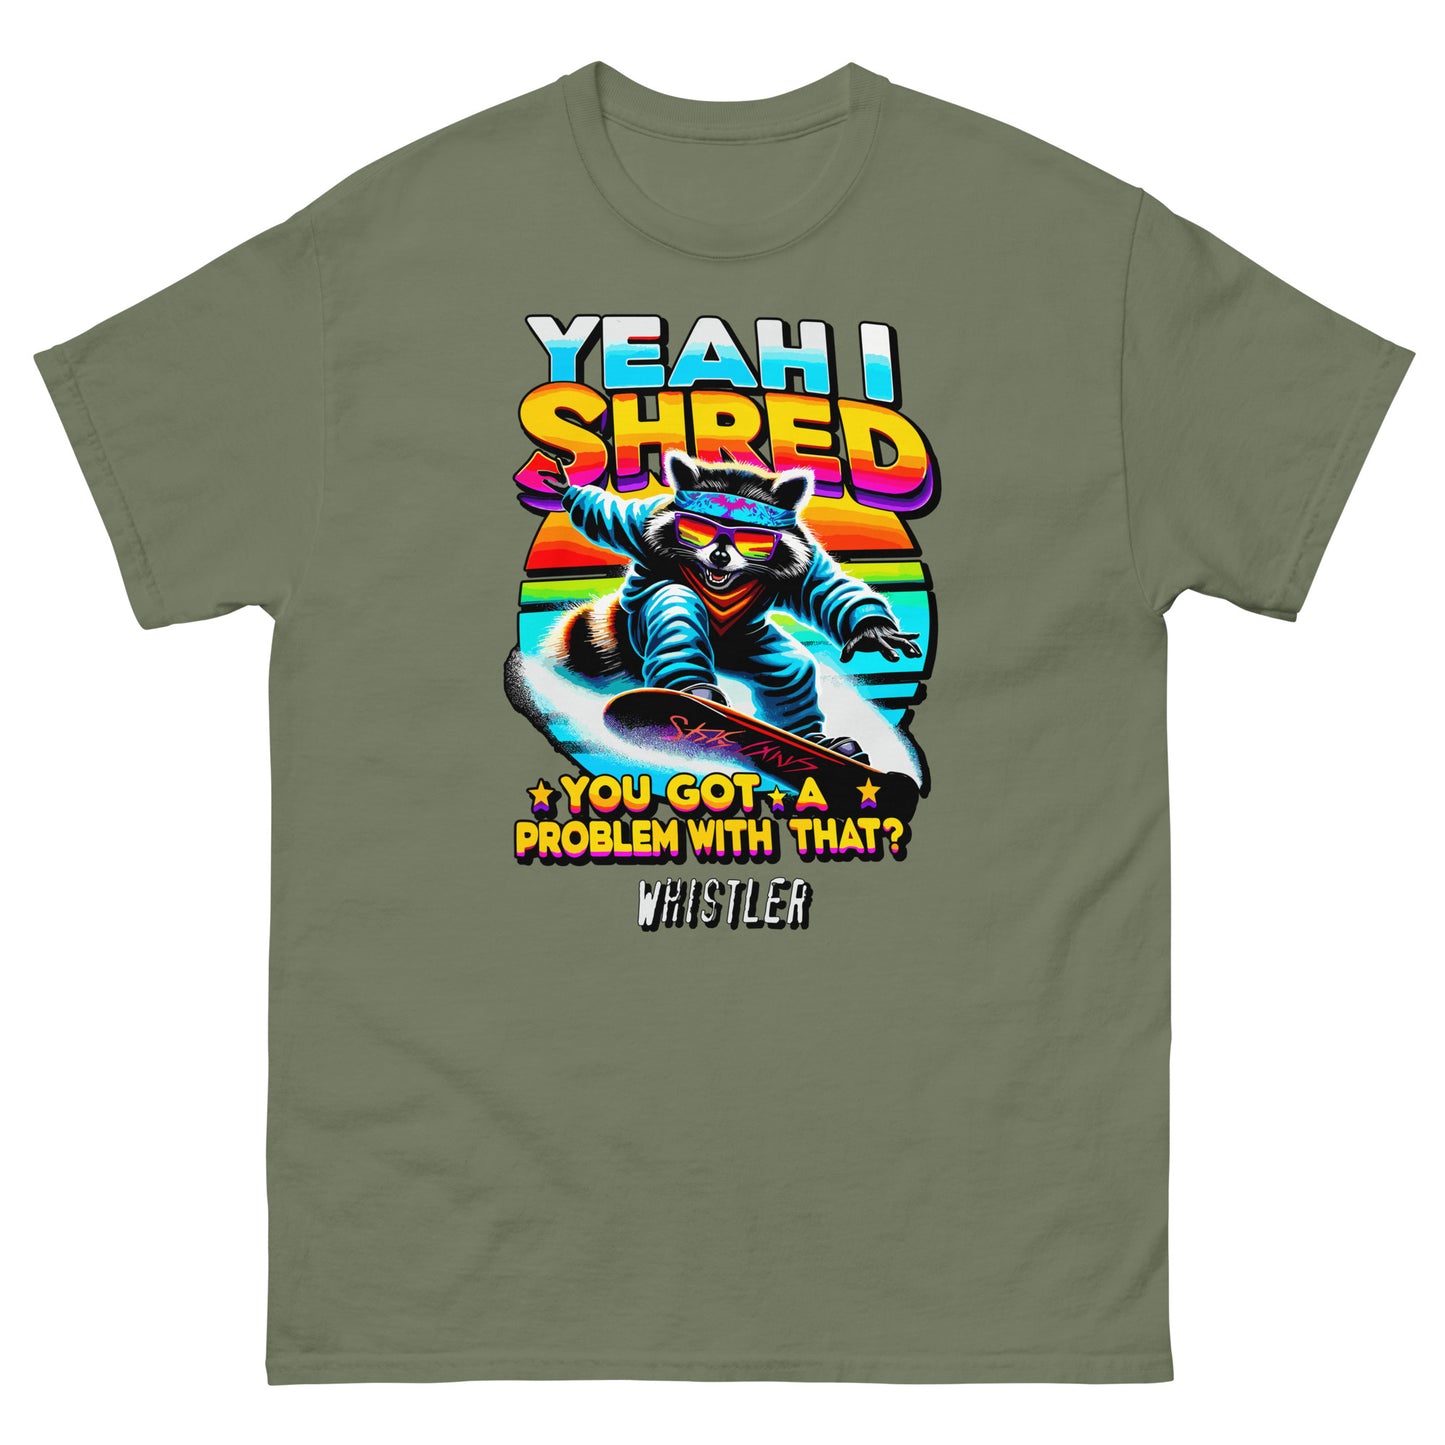 YEah I shred you got a problem with that? Whistler with racoon snowboading printed t-shirt by Whistler Shirts